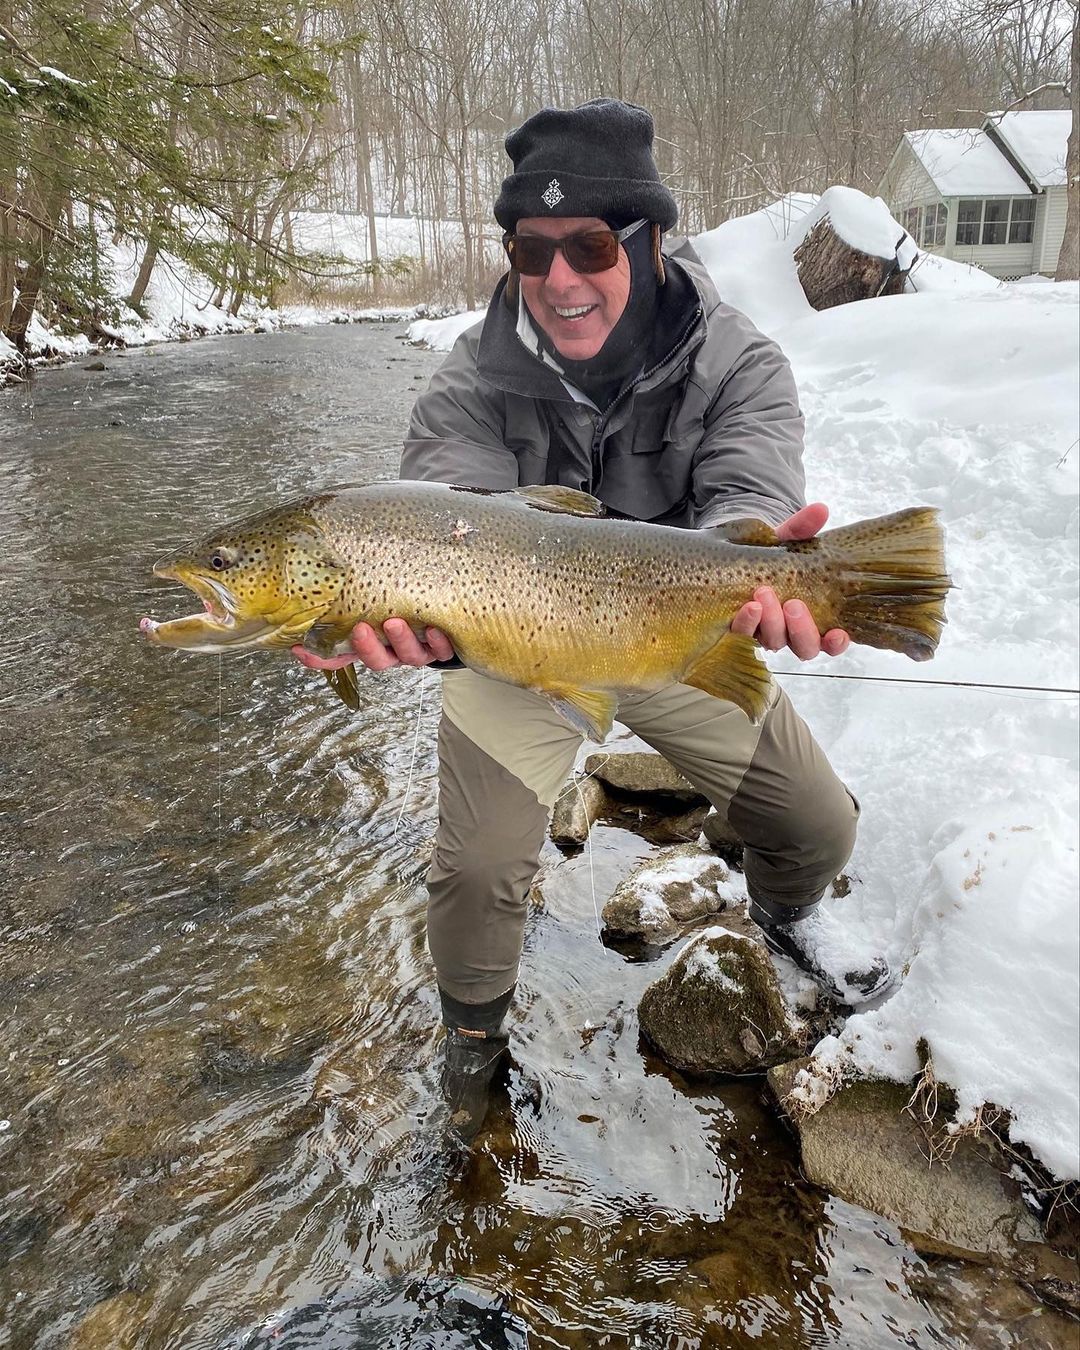 The 127 acre tract of land that #HVAgventures destination HomeWaters calls home offers private fly fishing access to nearly 70 miles of blue ribbon trout and steelhead rivers across Pennsylvania and near Vail and Steamboat Springs, Colorado 